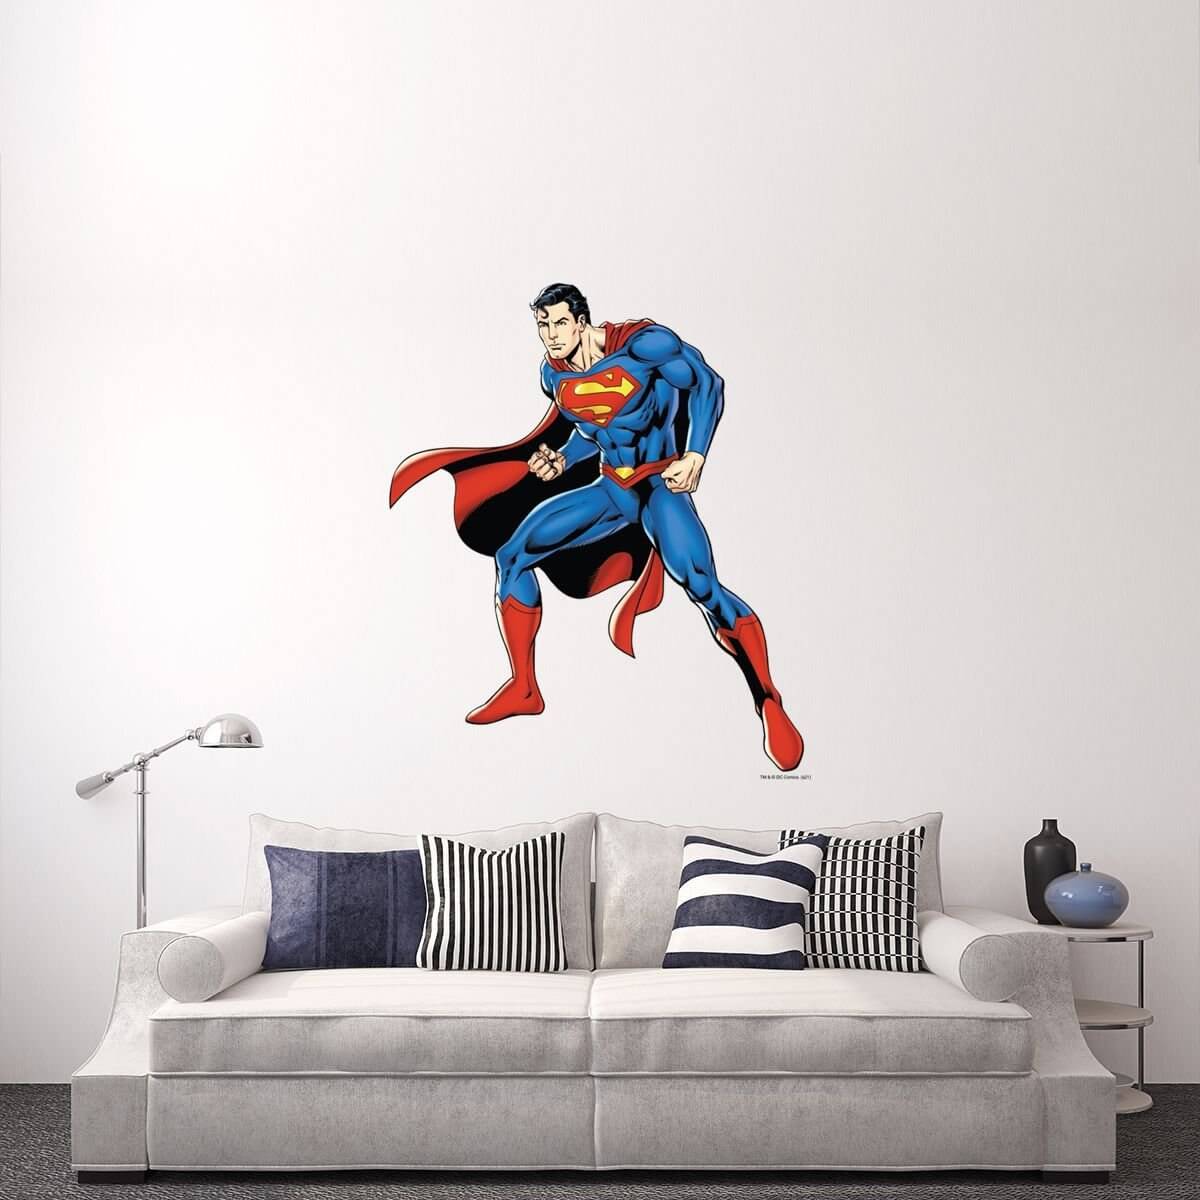 Kismet Decals Superman Combat Ready Licensed Wall Sticker - Easy DIY Justice League Home & Room Decor Wall Art - Kismet Decals